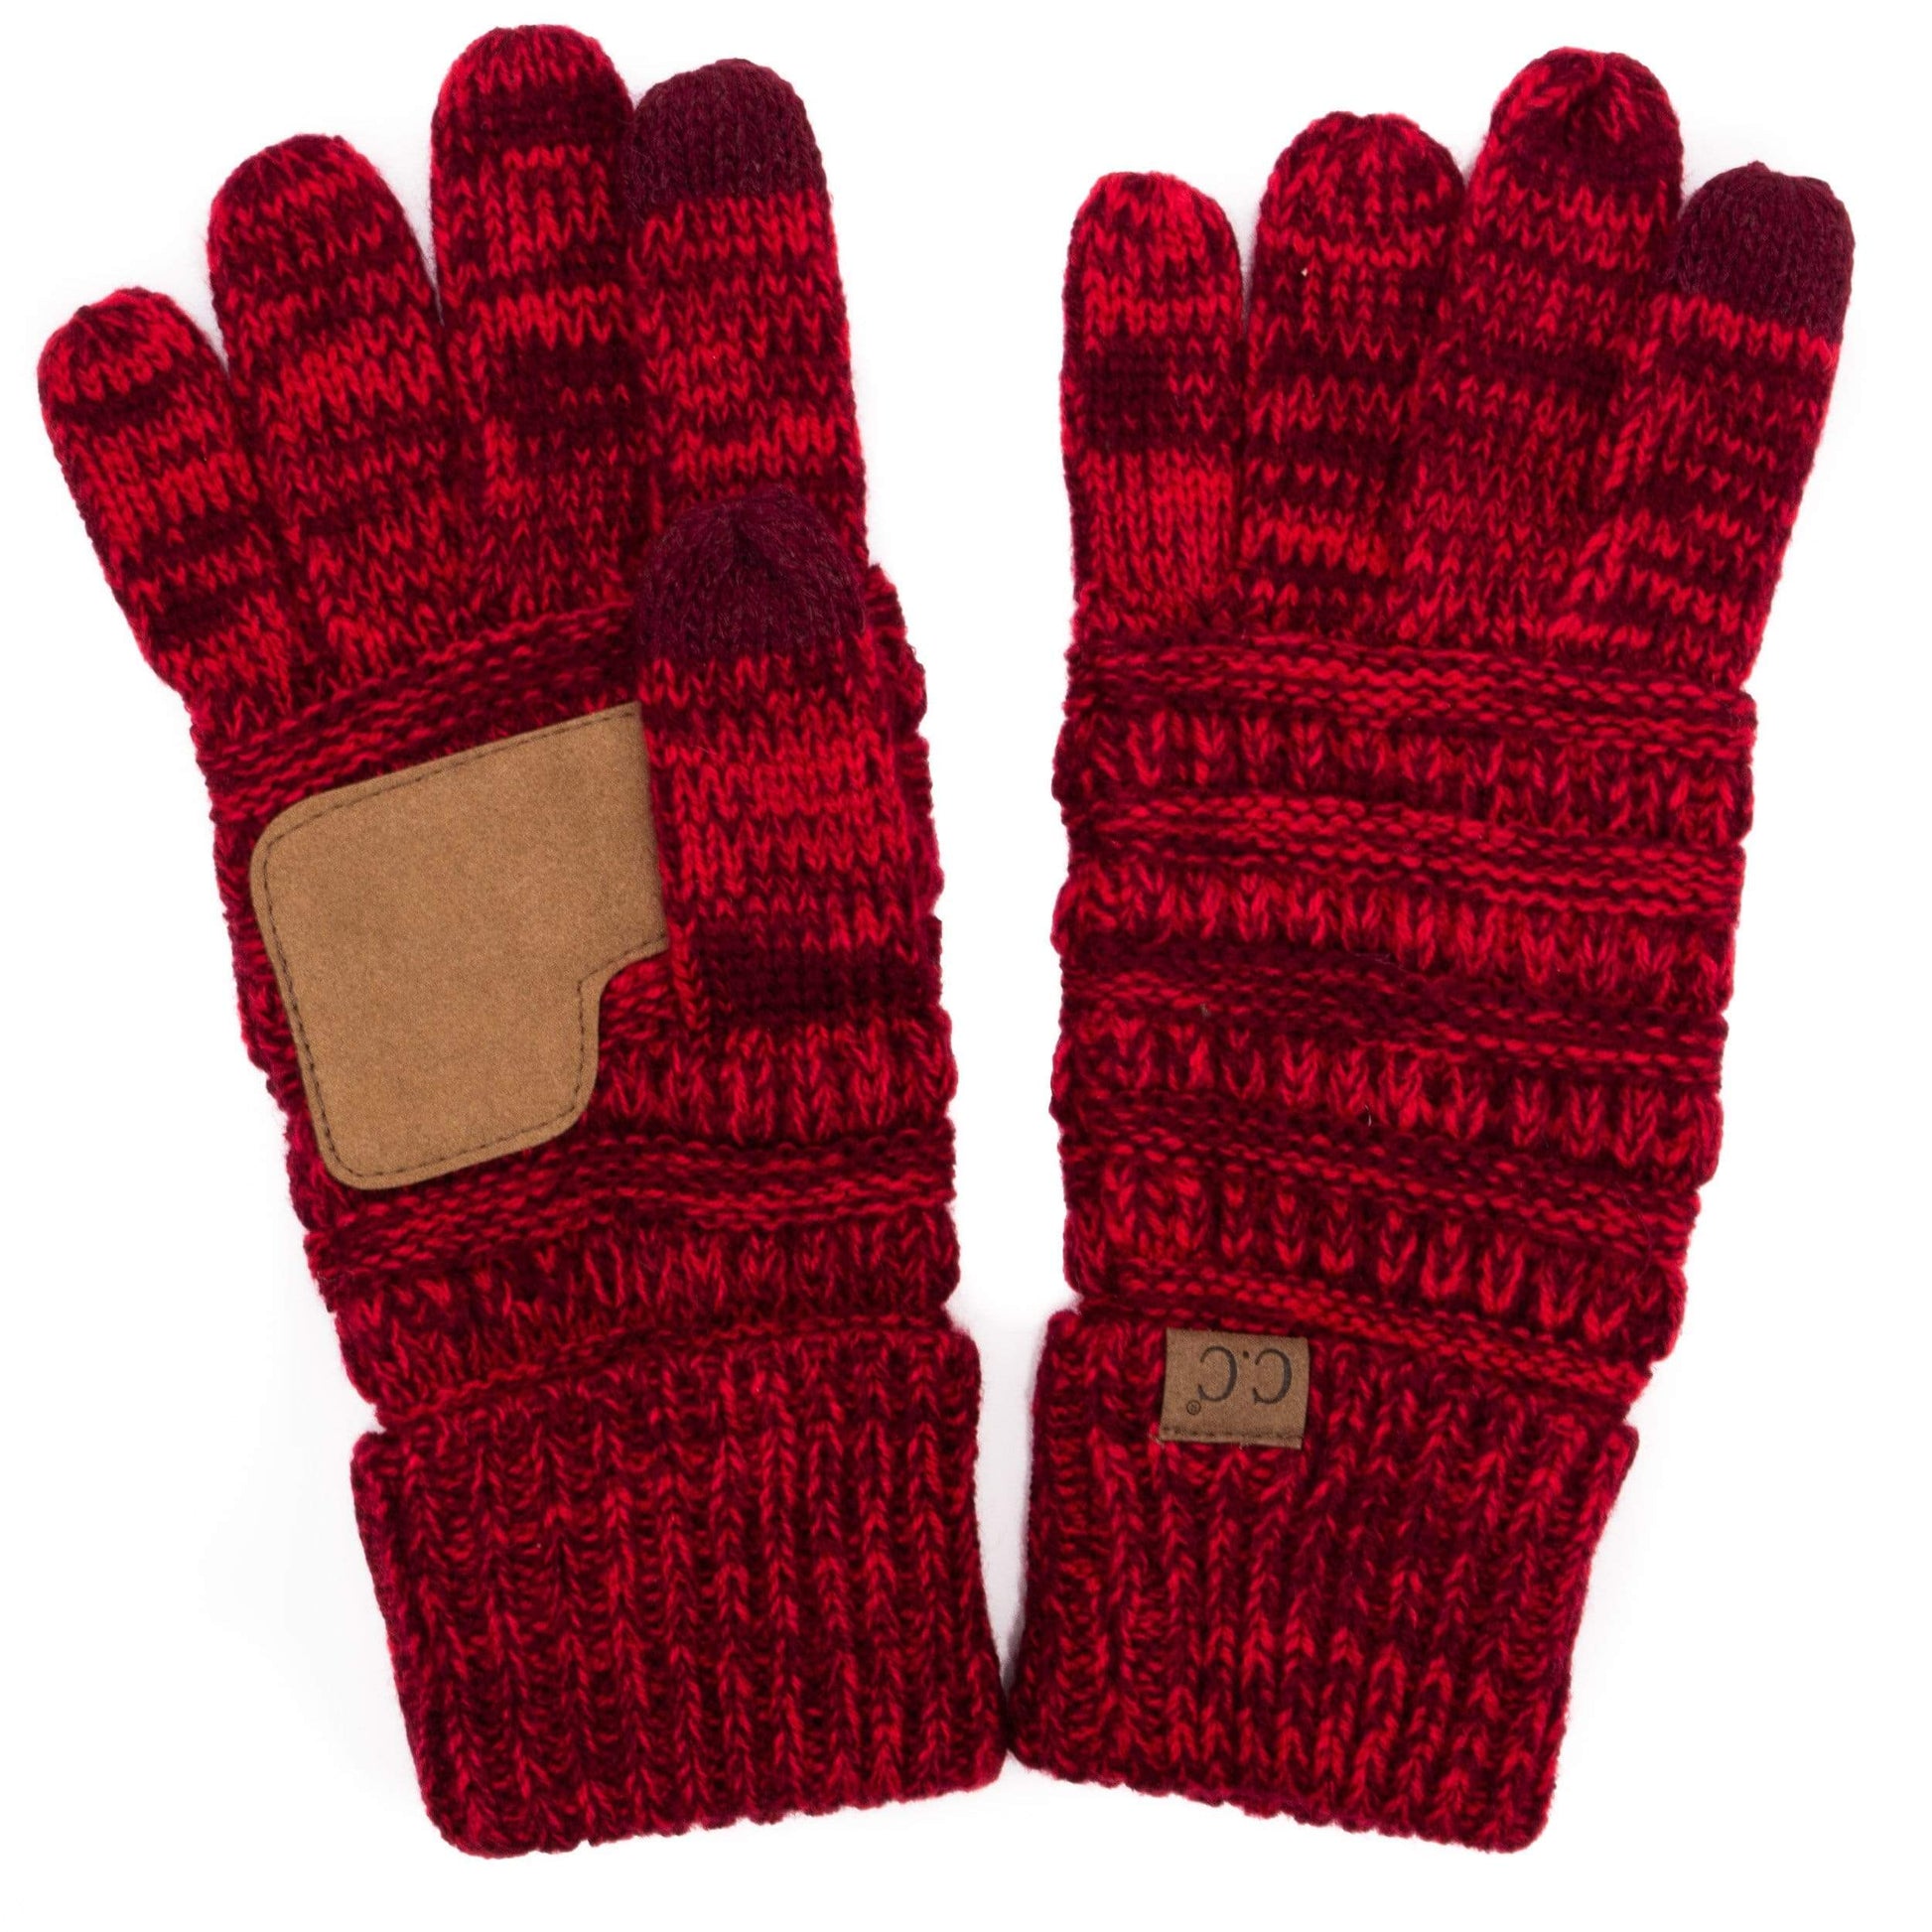 C.C Apparel Two Tone Burgundy C.C Unisex Cable Knit Winter Warm Anti-Slip Two-Toned Touchscreen Texting Gloves